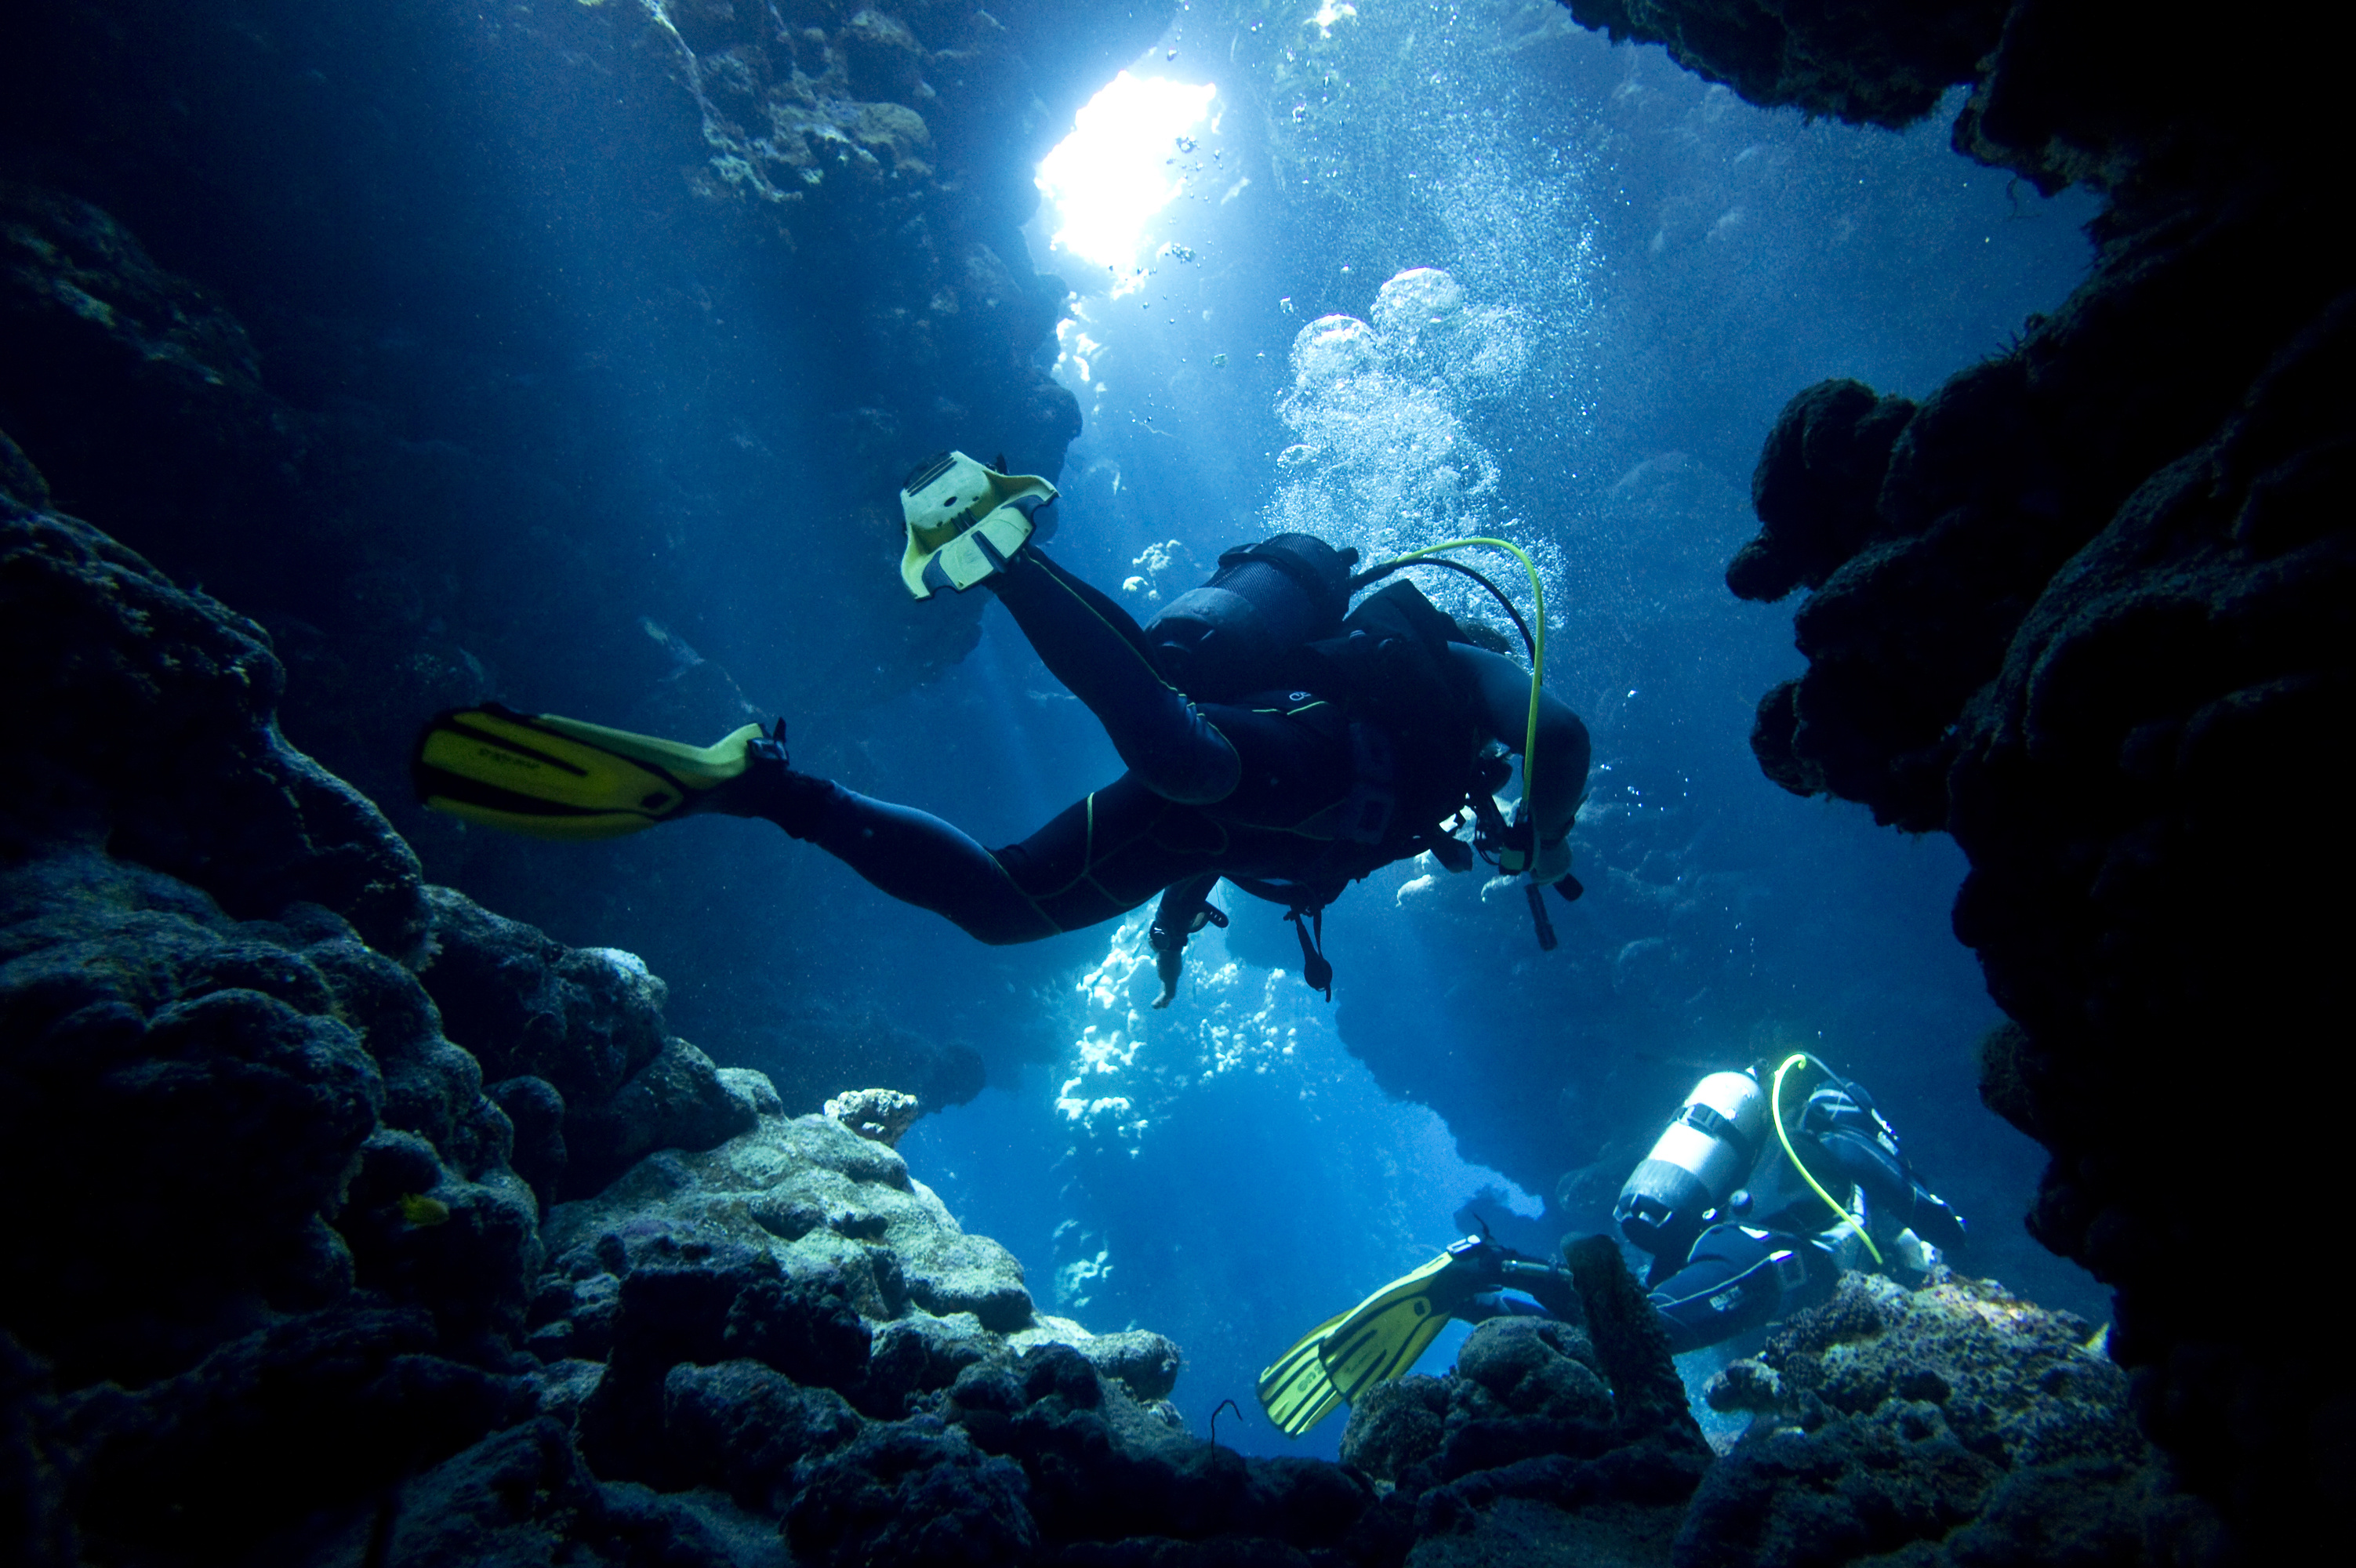 Scuba Diving: A couple of divers explore an underwater cave, Extreme water sport. 3010x2000 HD Background.